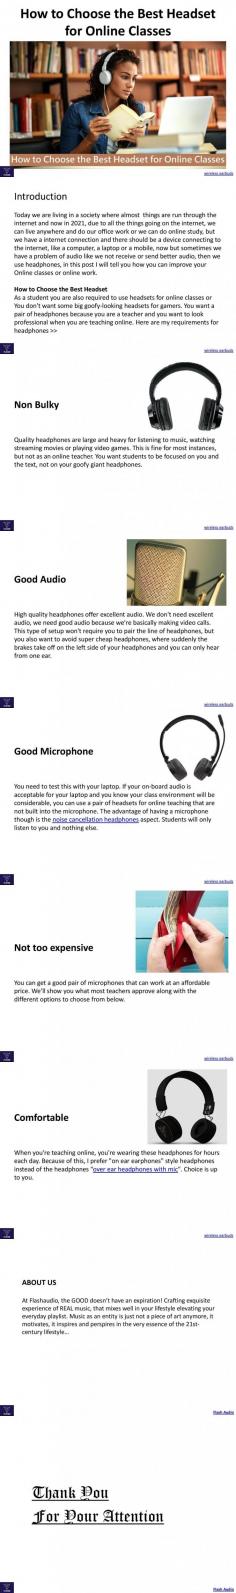 Flashaudio get latest earbuds, bluetooth headphones, earphones & more. As a student you are also required to use headsets for online classes or You don't want some big goofy-looking headsets for gamers. https://www.flashaudio.in/product-category/truly-wireless-noise-cancelling-headphones/